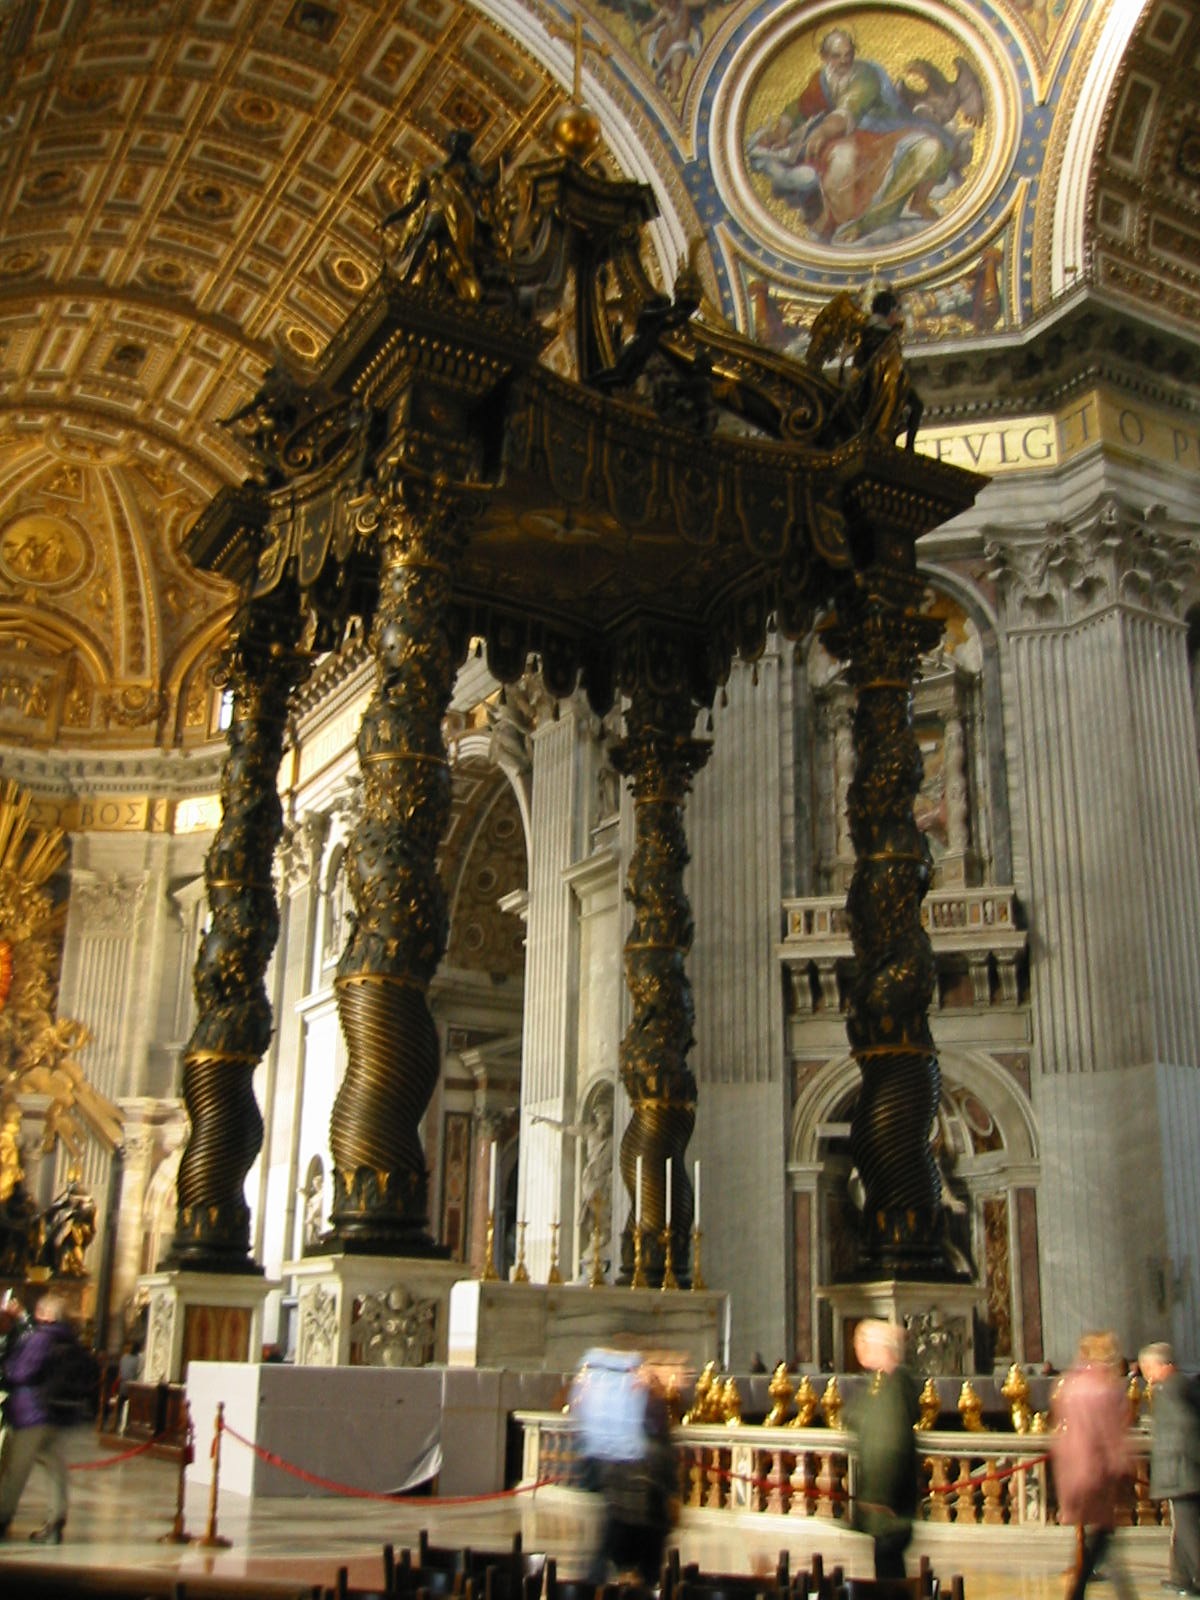 Only the Pope celebrates Mass at this altar